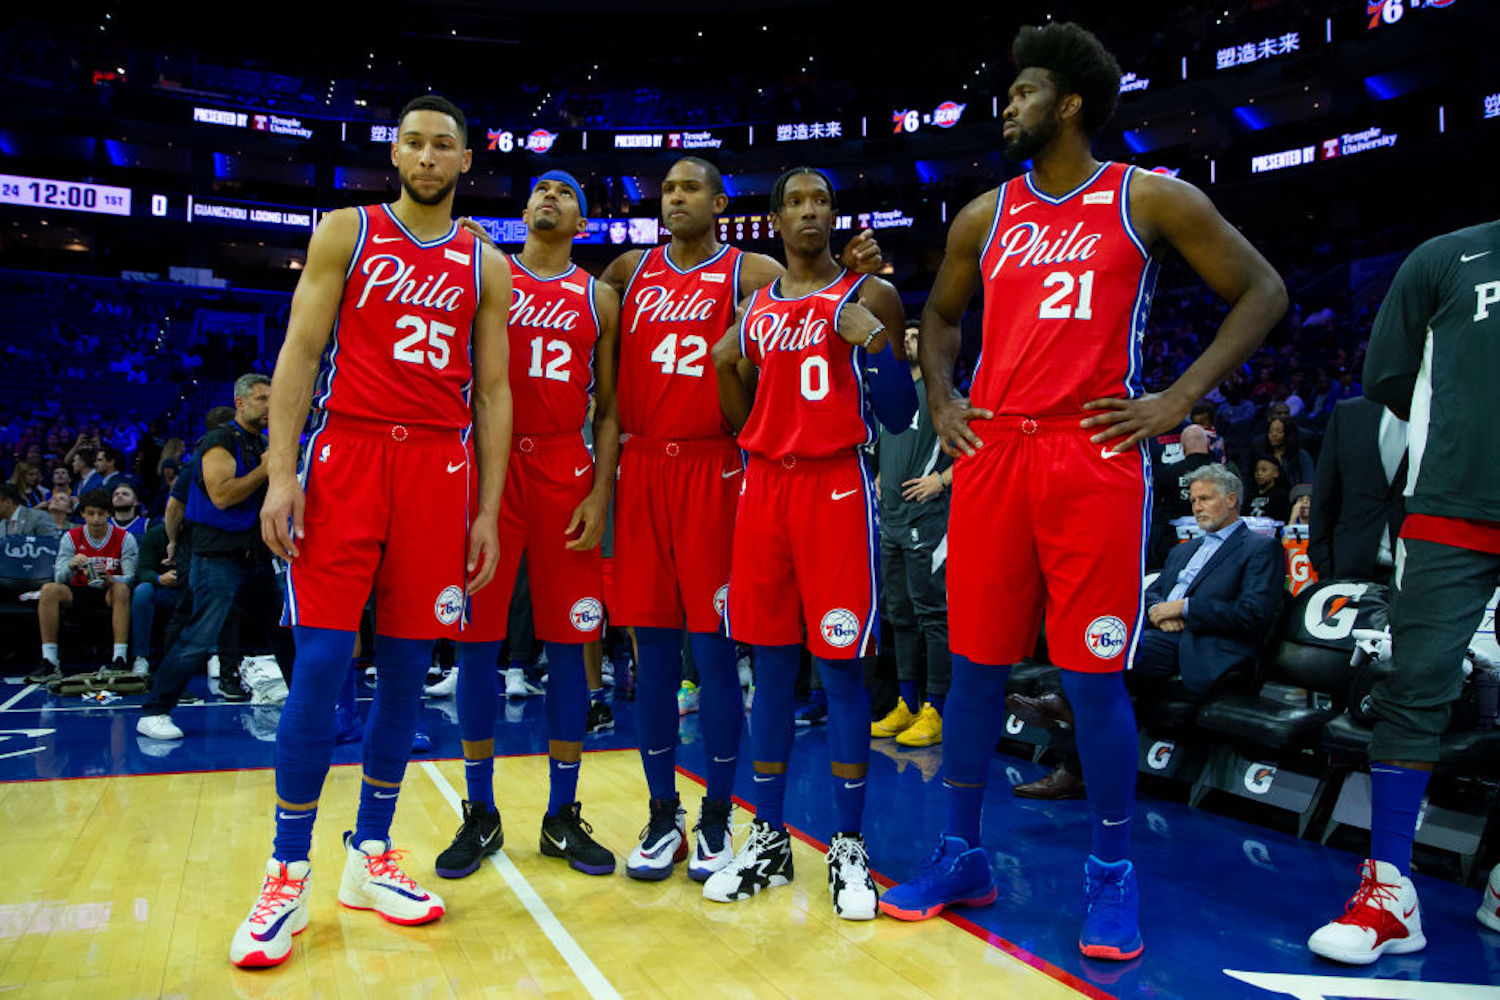 The Sixers look lost in the 2020 playoffs, and there's still a $289 million problem that will cripple the franchise for years to come.